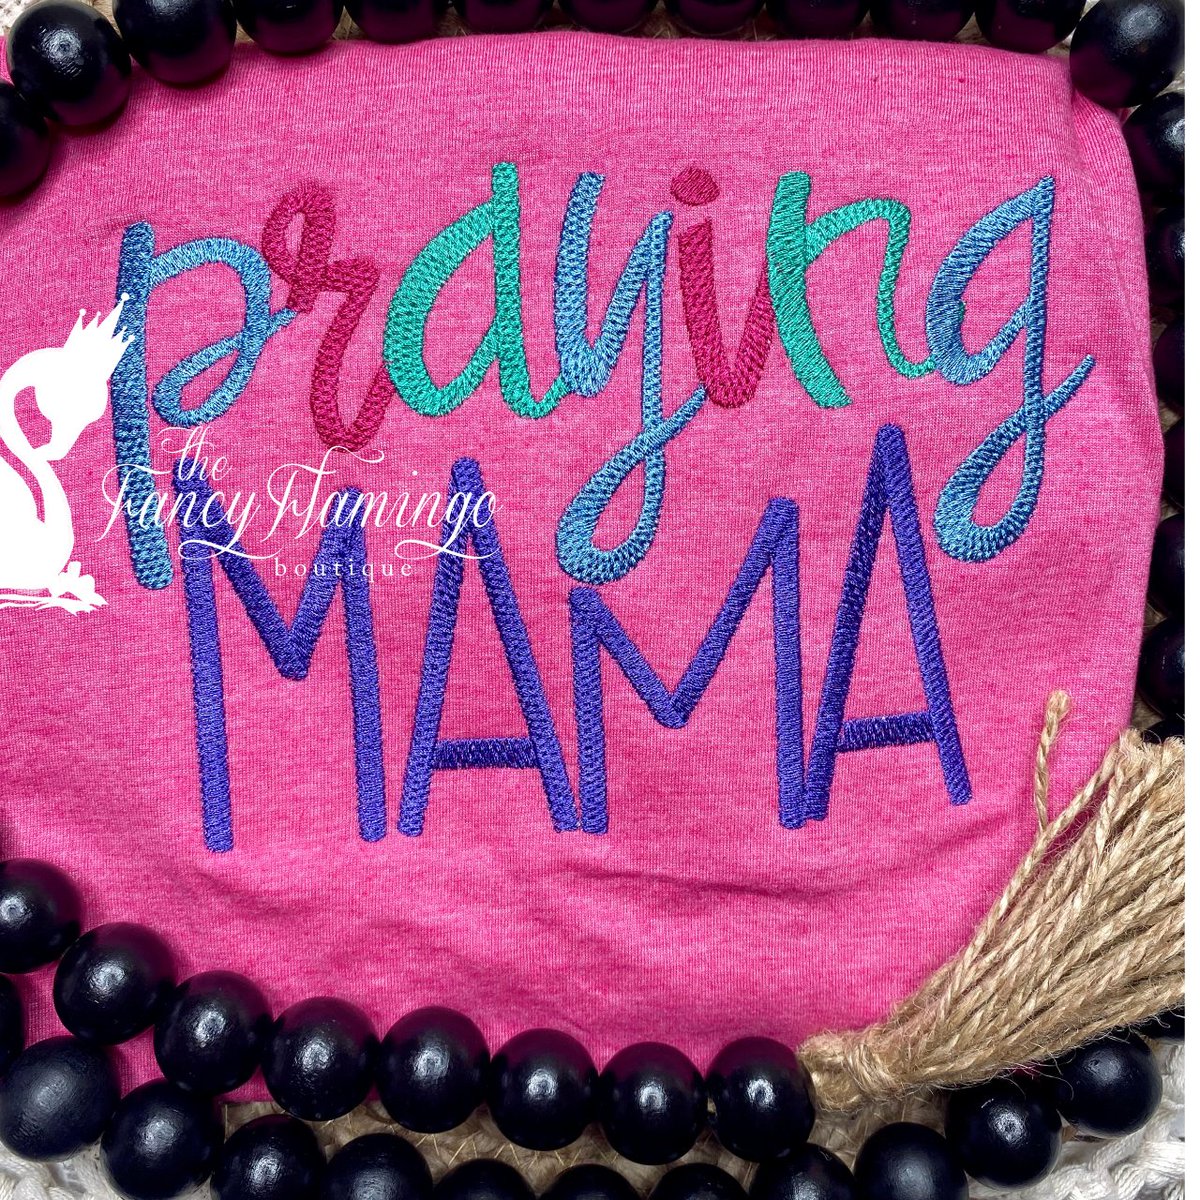 This colorful praying mama embroidered shirt is the perfect way to add a pop of color to your wardrobe while expressing your faith. #prayingmama #machineembroidery #mothersdaygift #giftforher #jacksonvillemoms